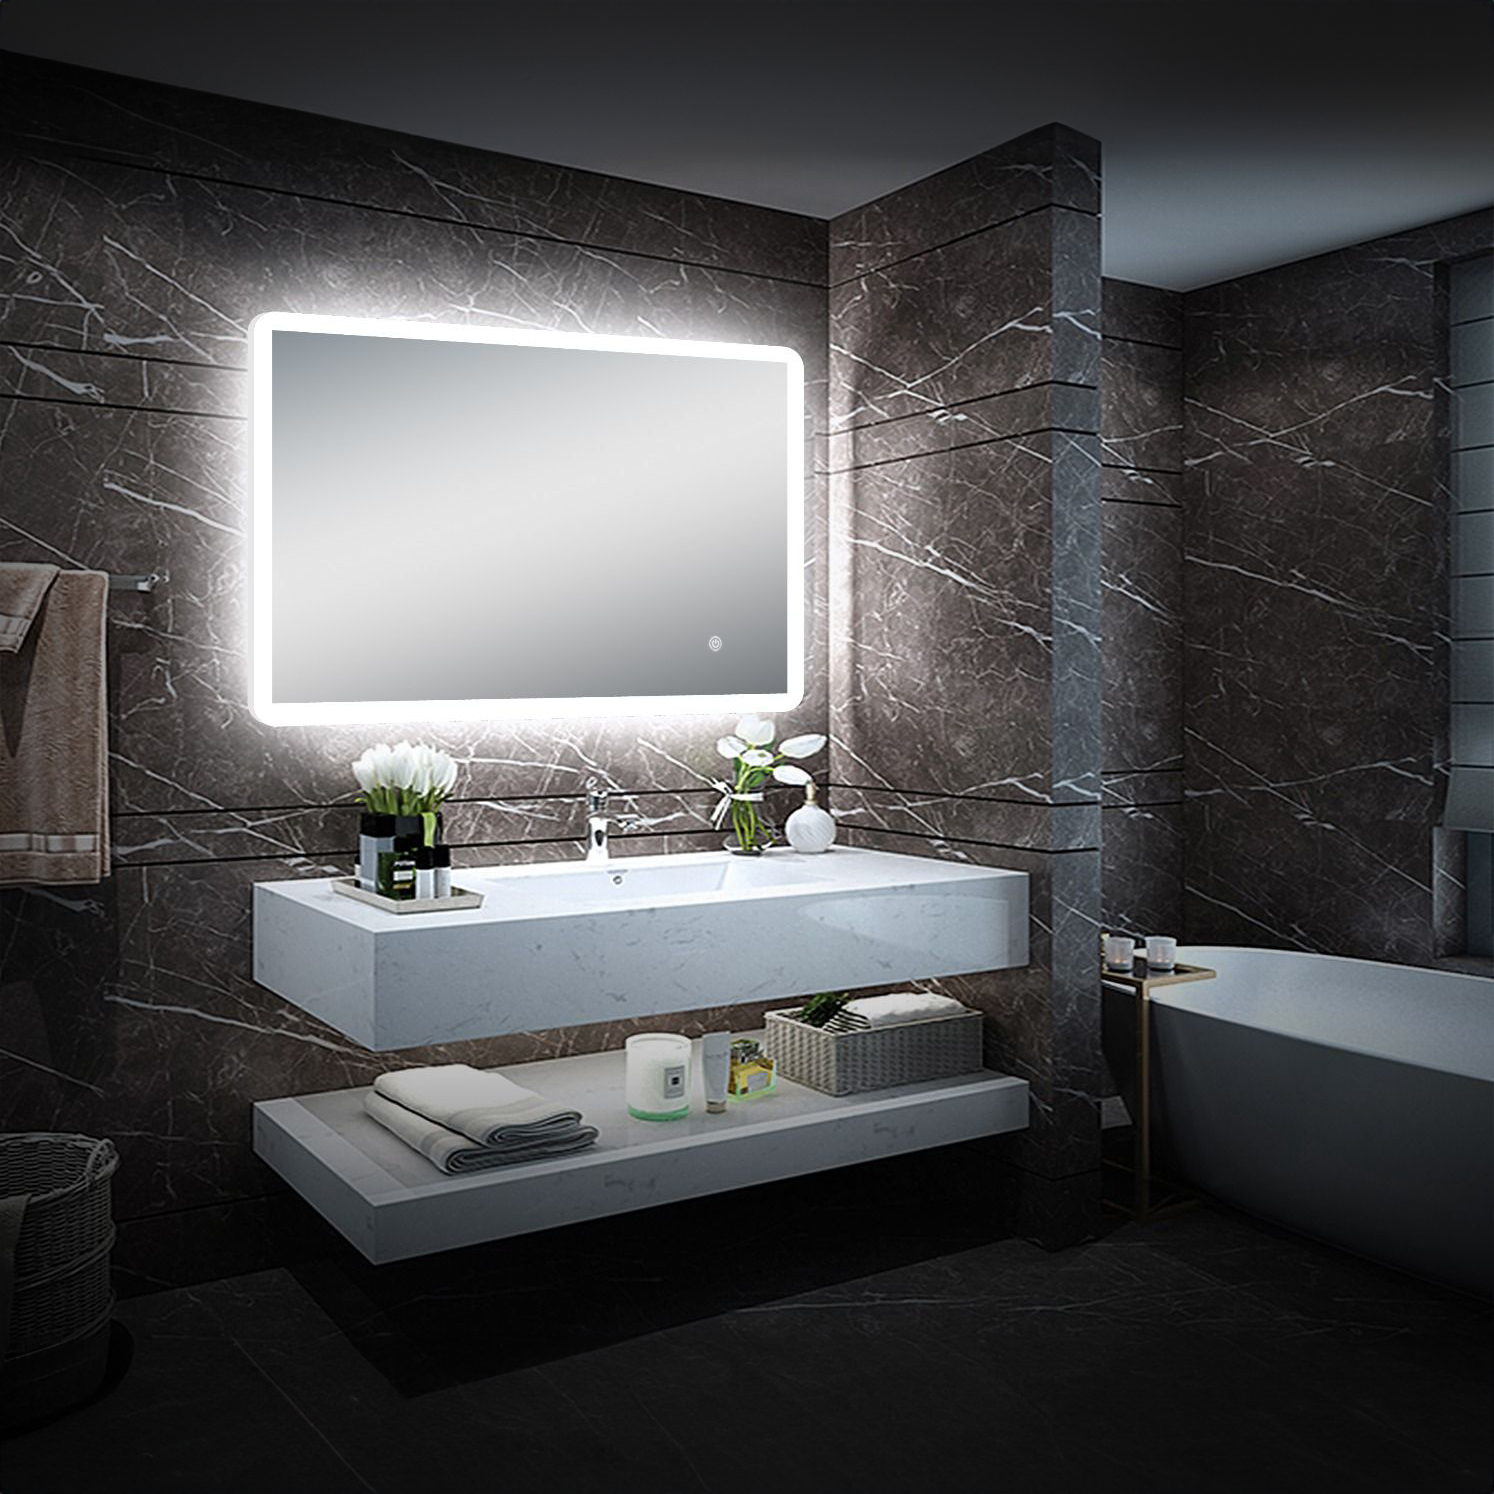 Pilsen LED Mirror with Integrated Dimmer and Defogger - Available in 4 Sizes